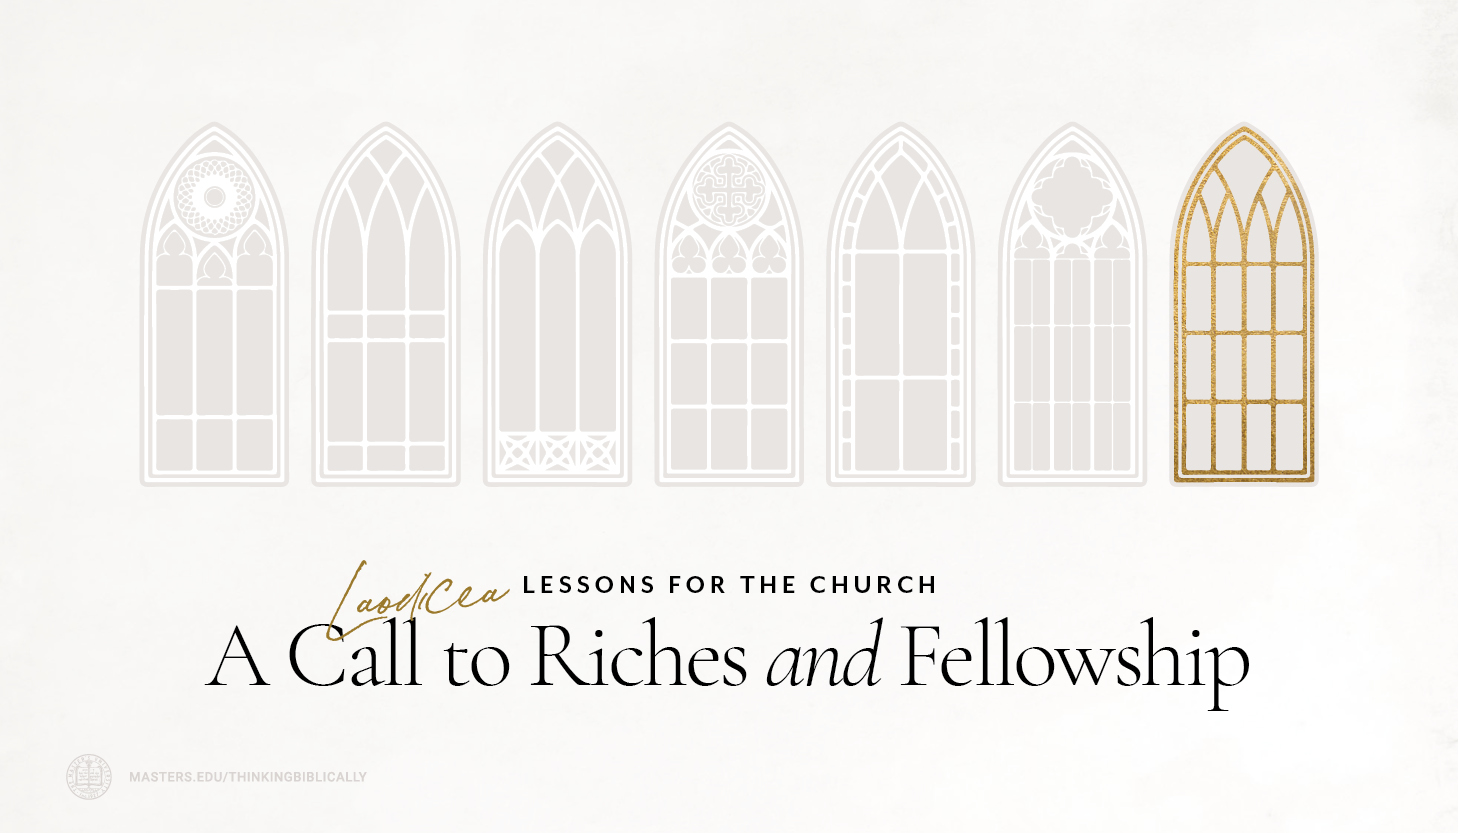 Laodicea: A Call to Riches and Fellowship